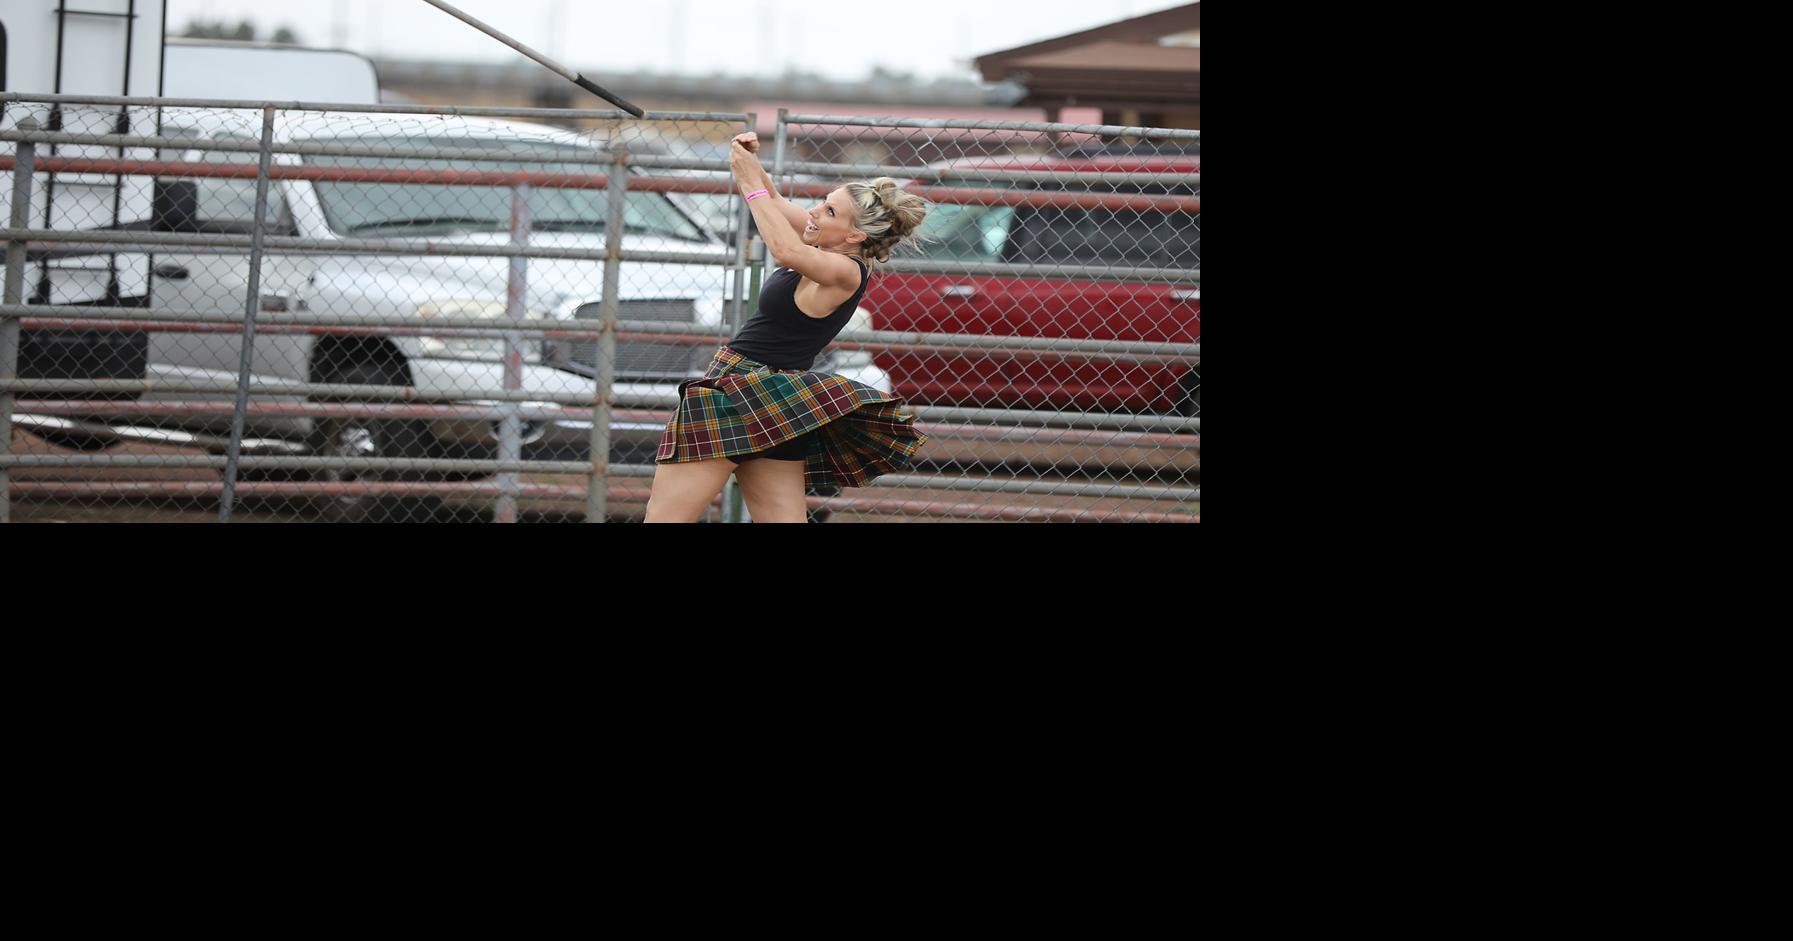 Gallery The Arizona Highland Games and Gathering in Williams hits its